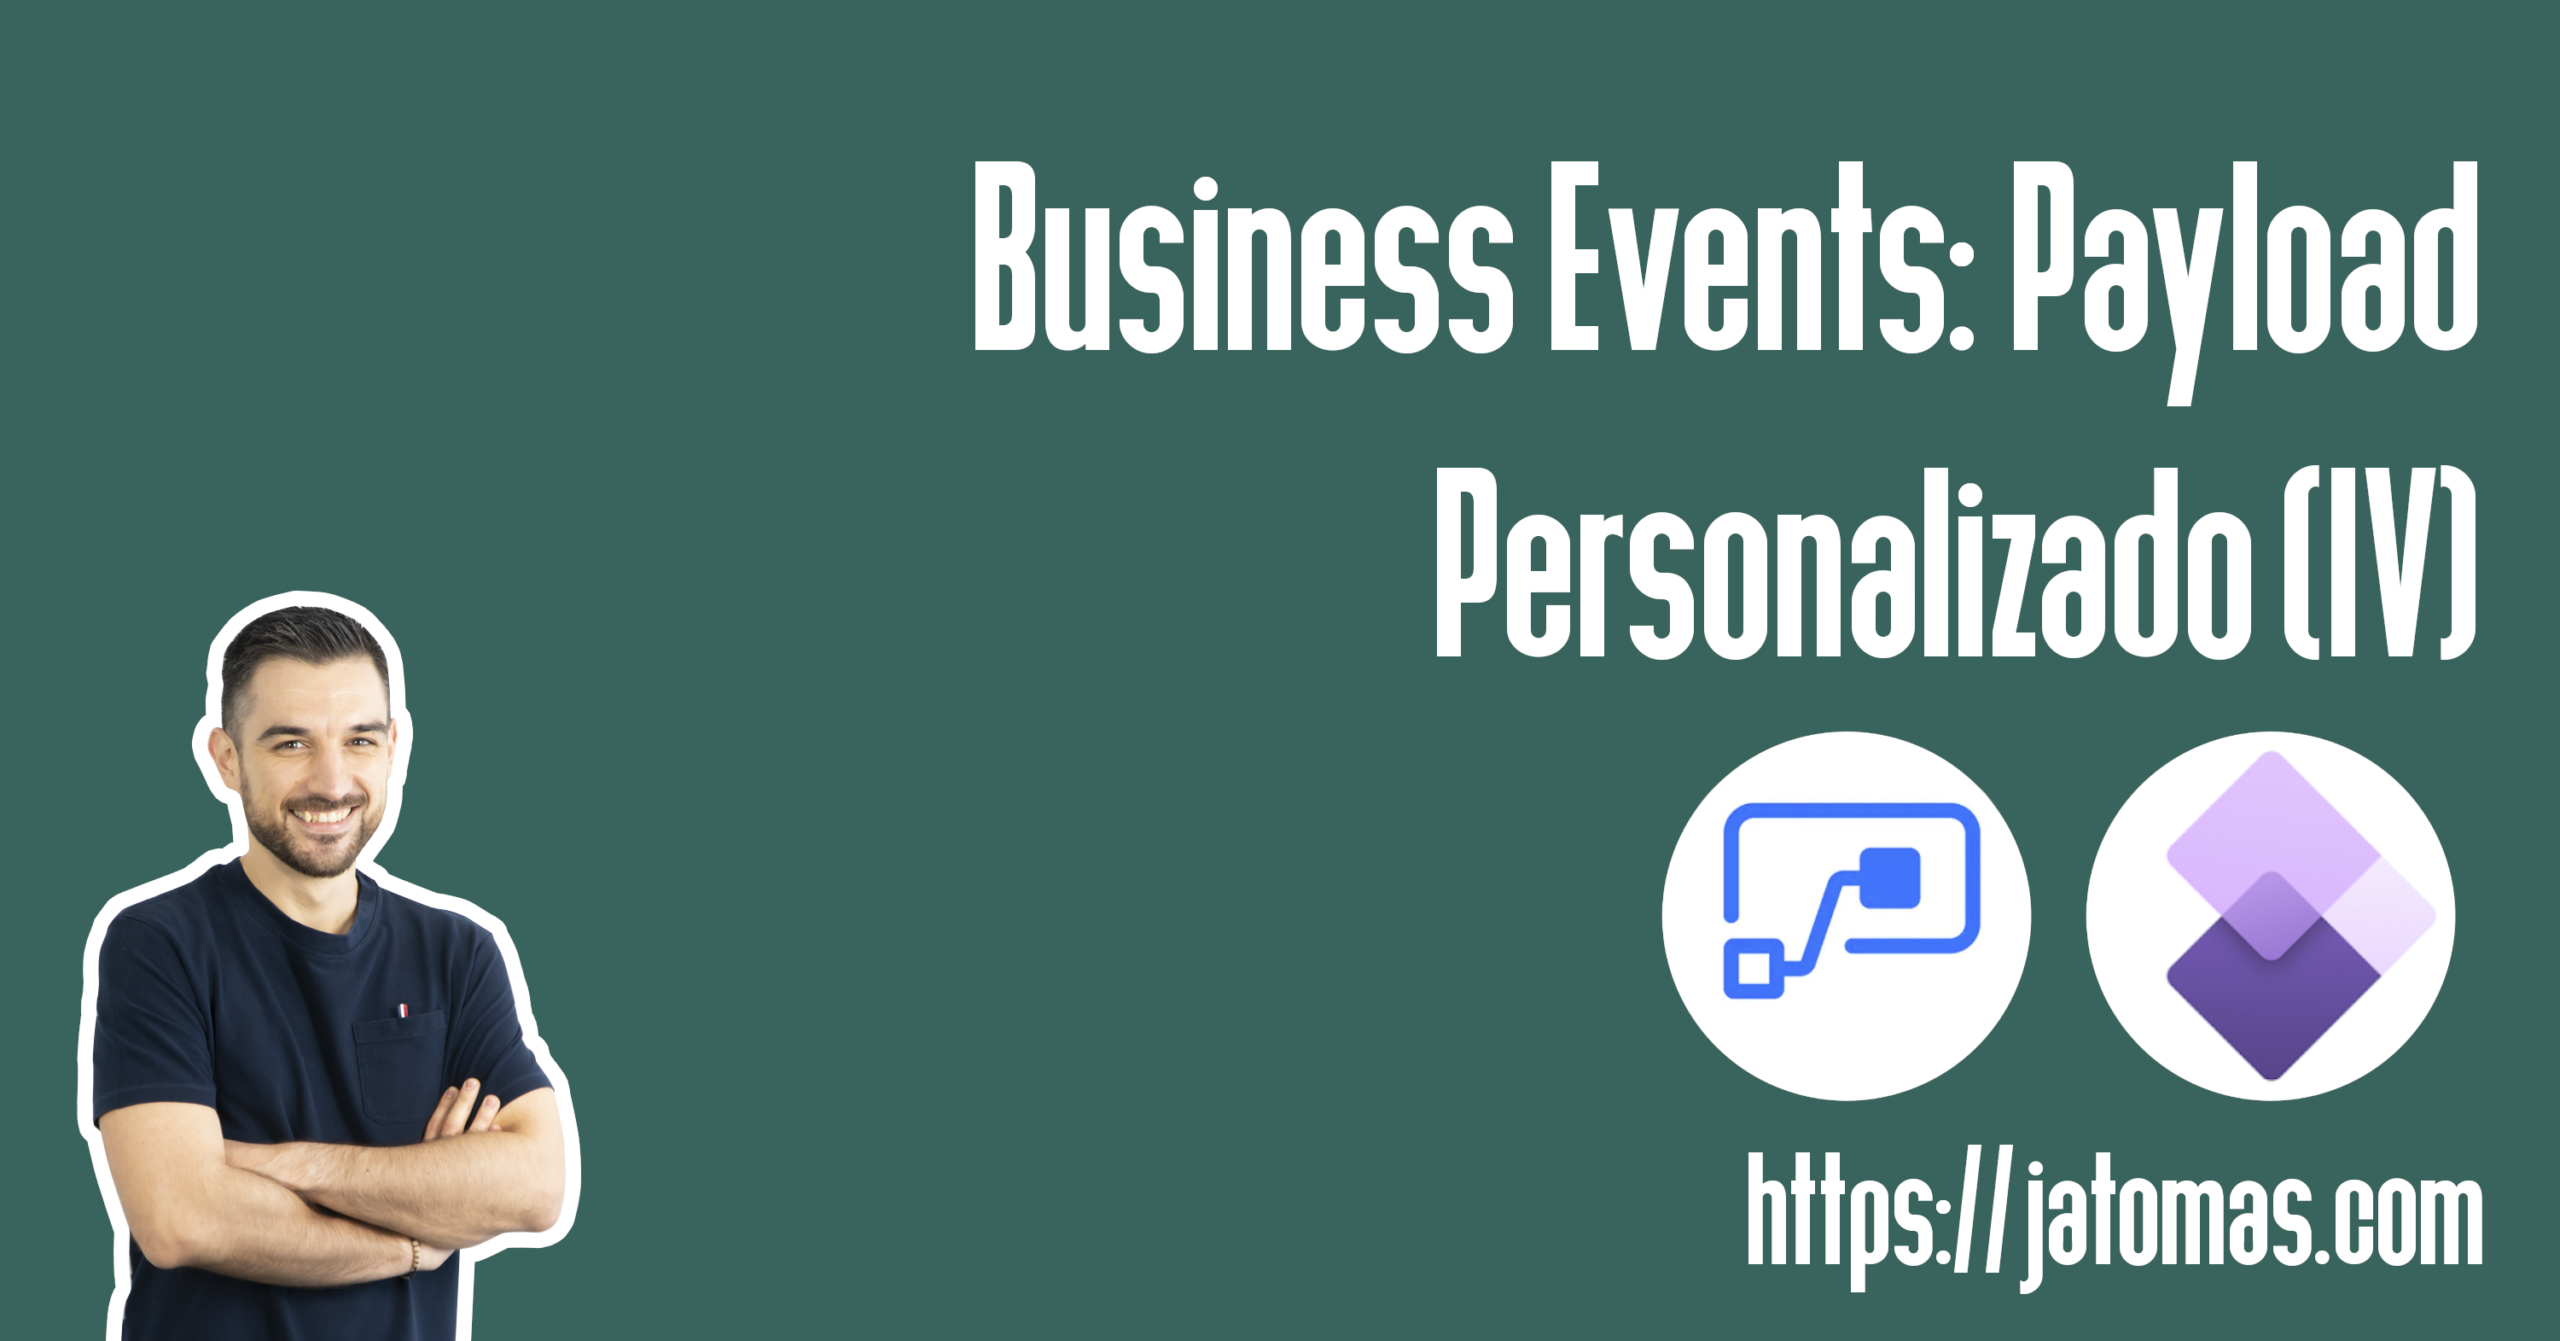 Business Events - Payload Personalizado (IV)